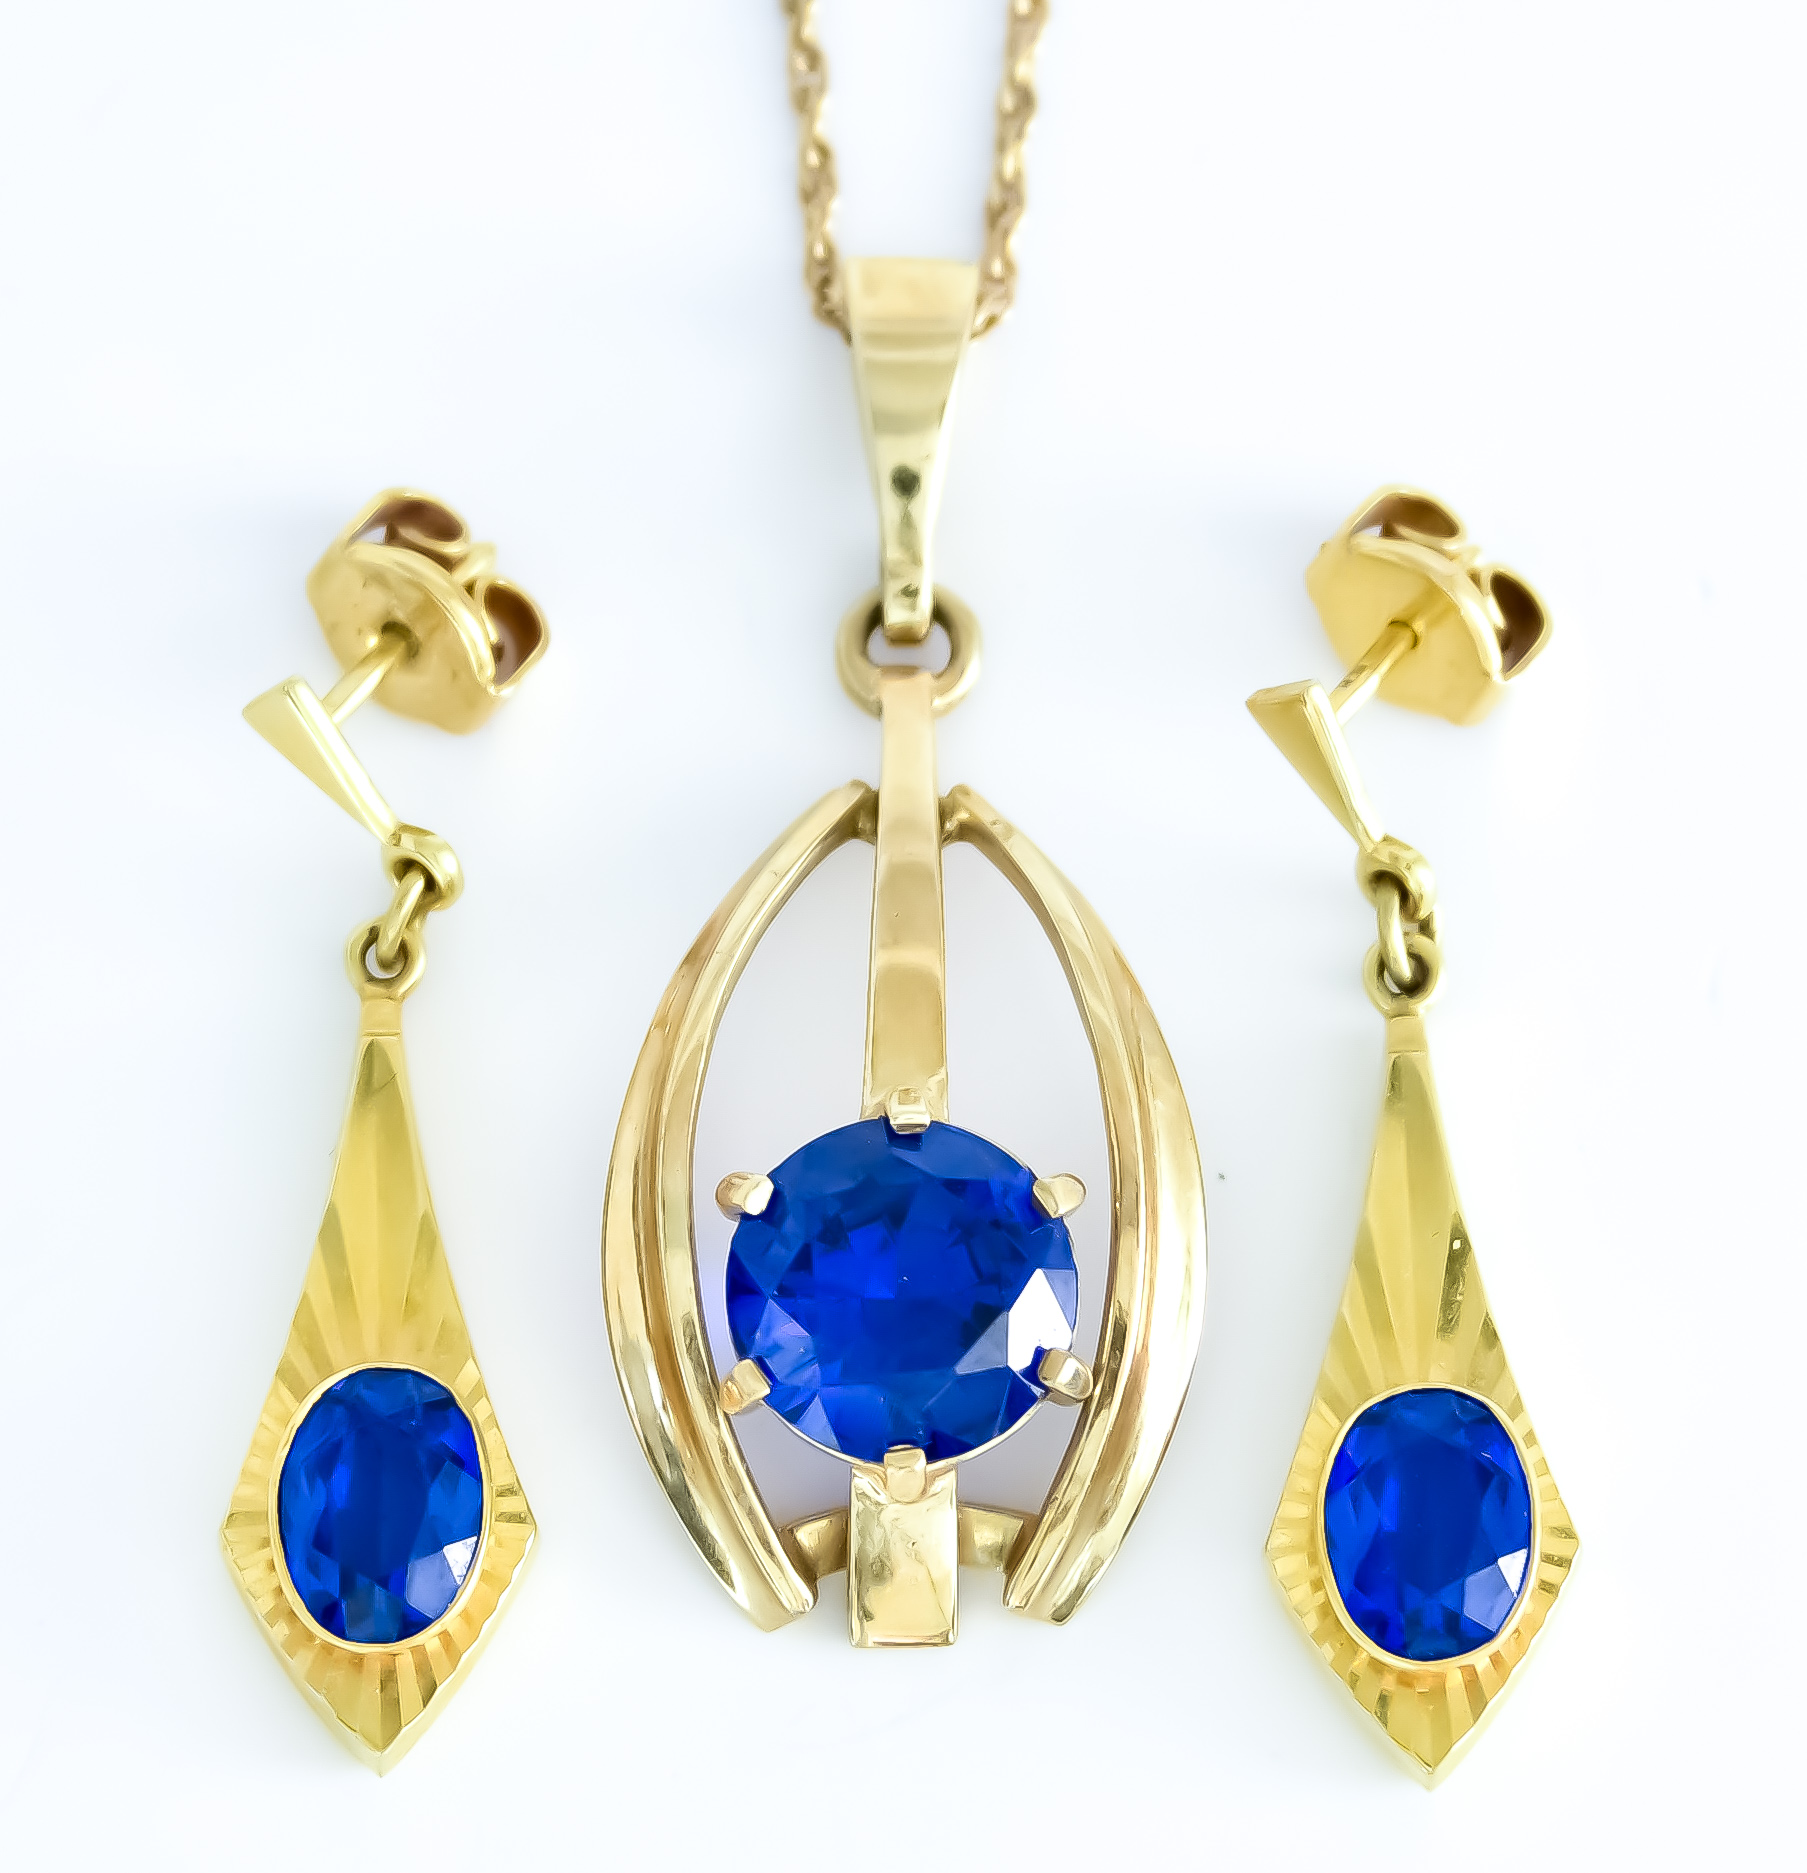 A 9ct Gold Paste Set Suite, Modern, comprising - pendant set with blue faceted stone on fine